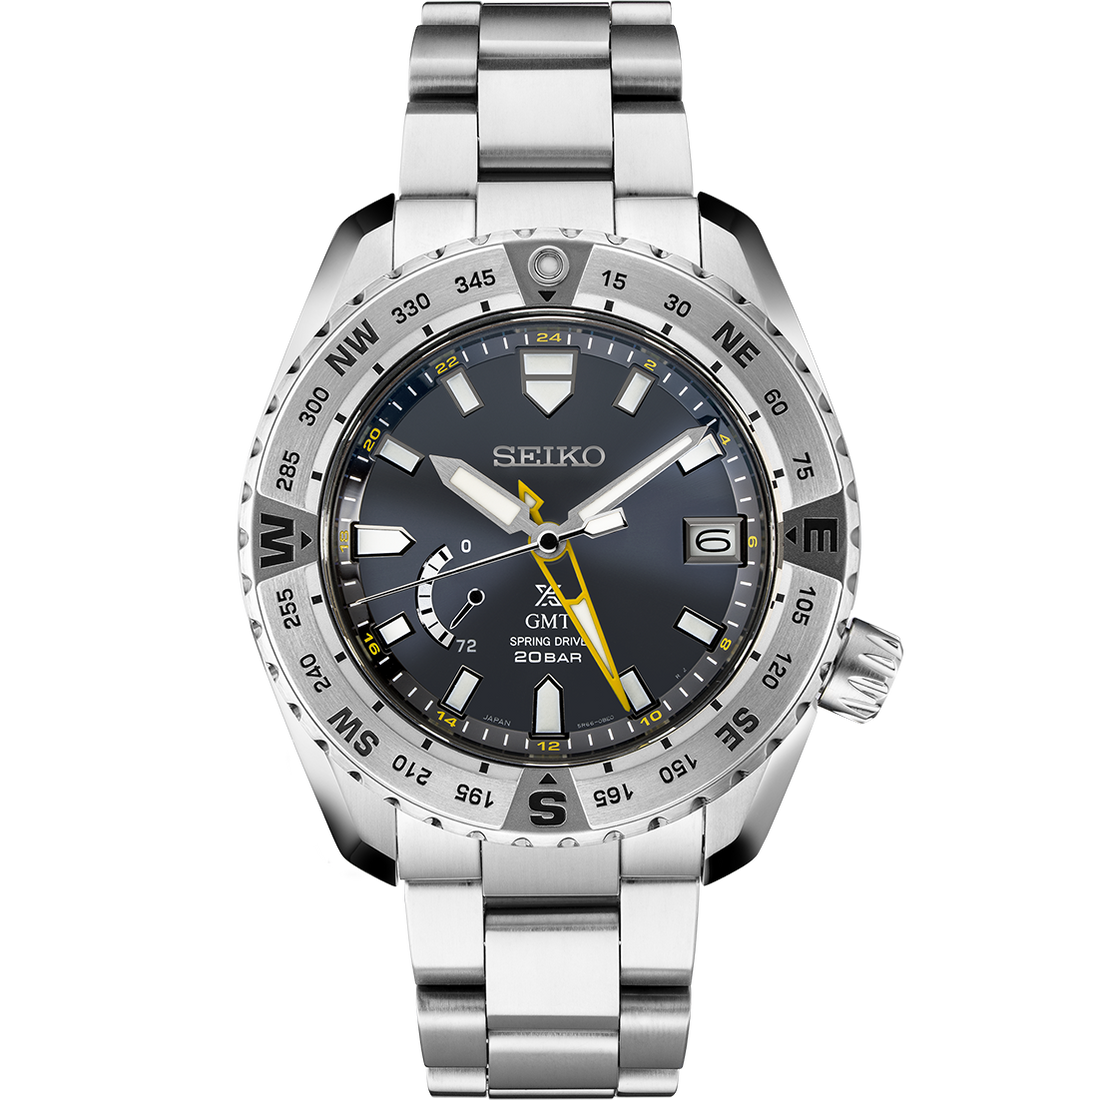 Seiko Prospex LX SNR025 Spring Drive 45mm GMT Automatic Watch | Skeie's  Jewelers